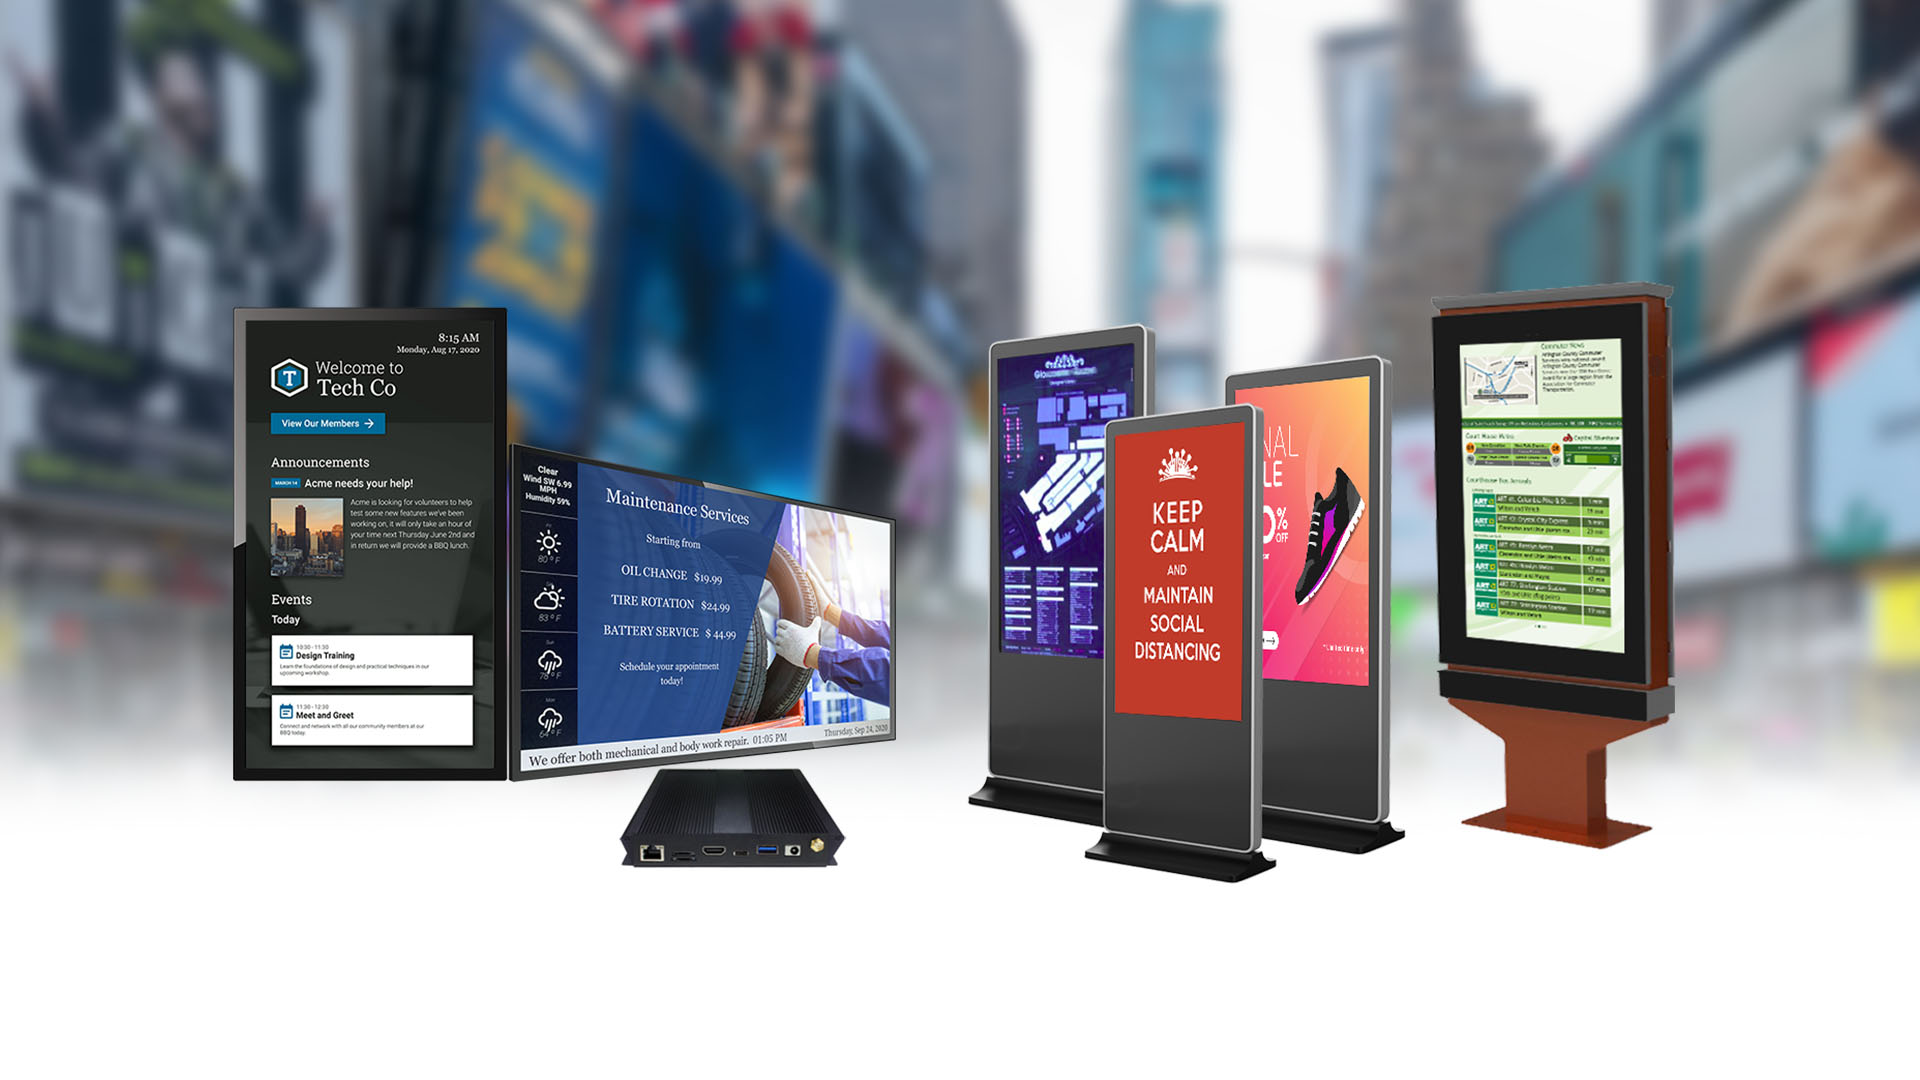 The Role of Digital Signage in Smart Cities and Urban Development